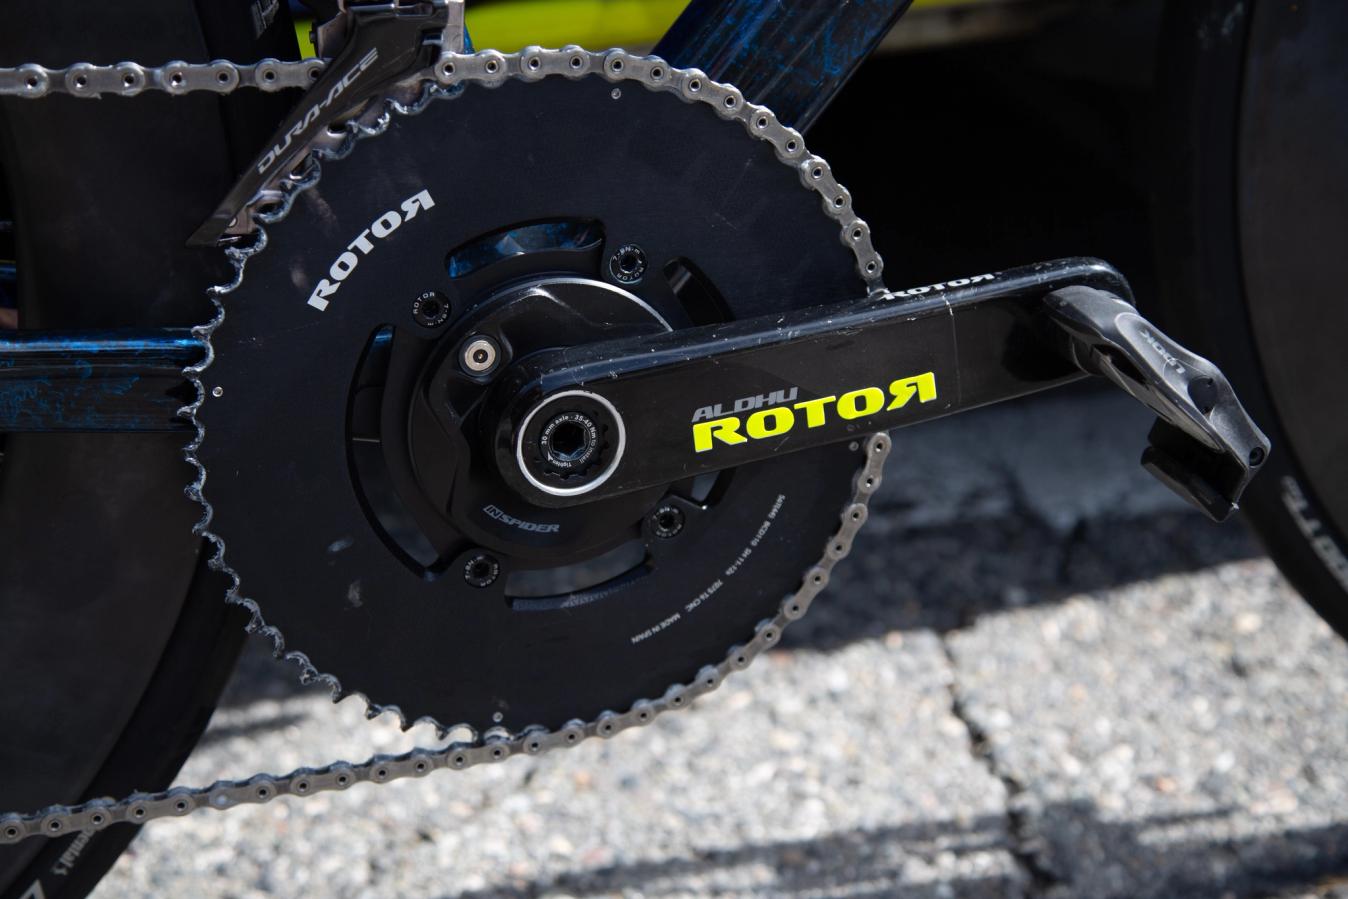 Rotor's 56/44 Aldhu chainset